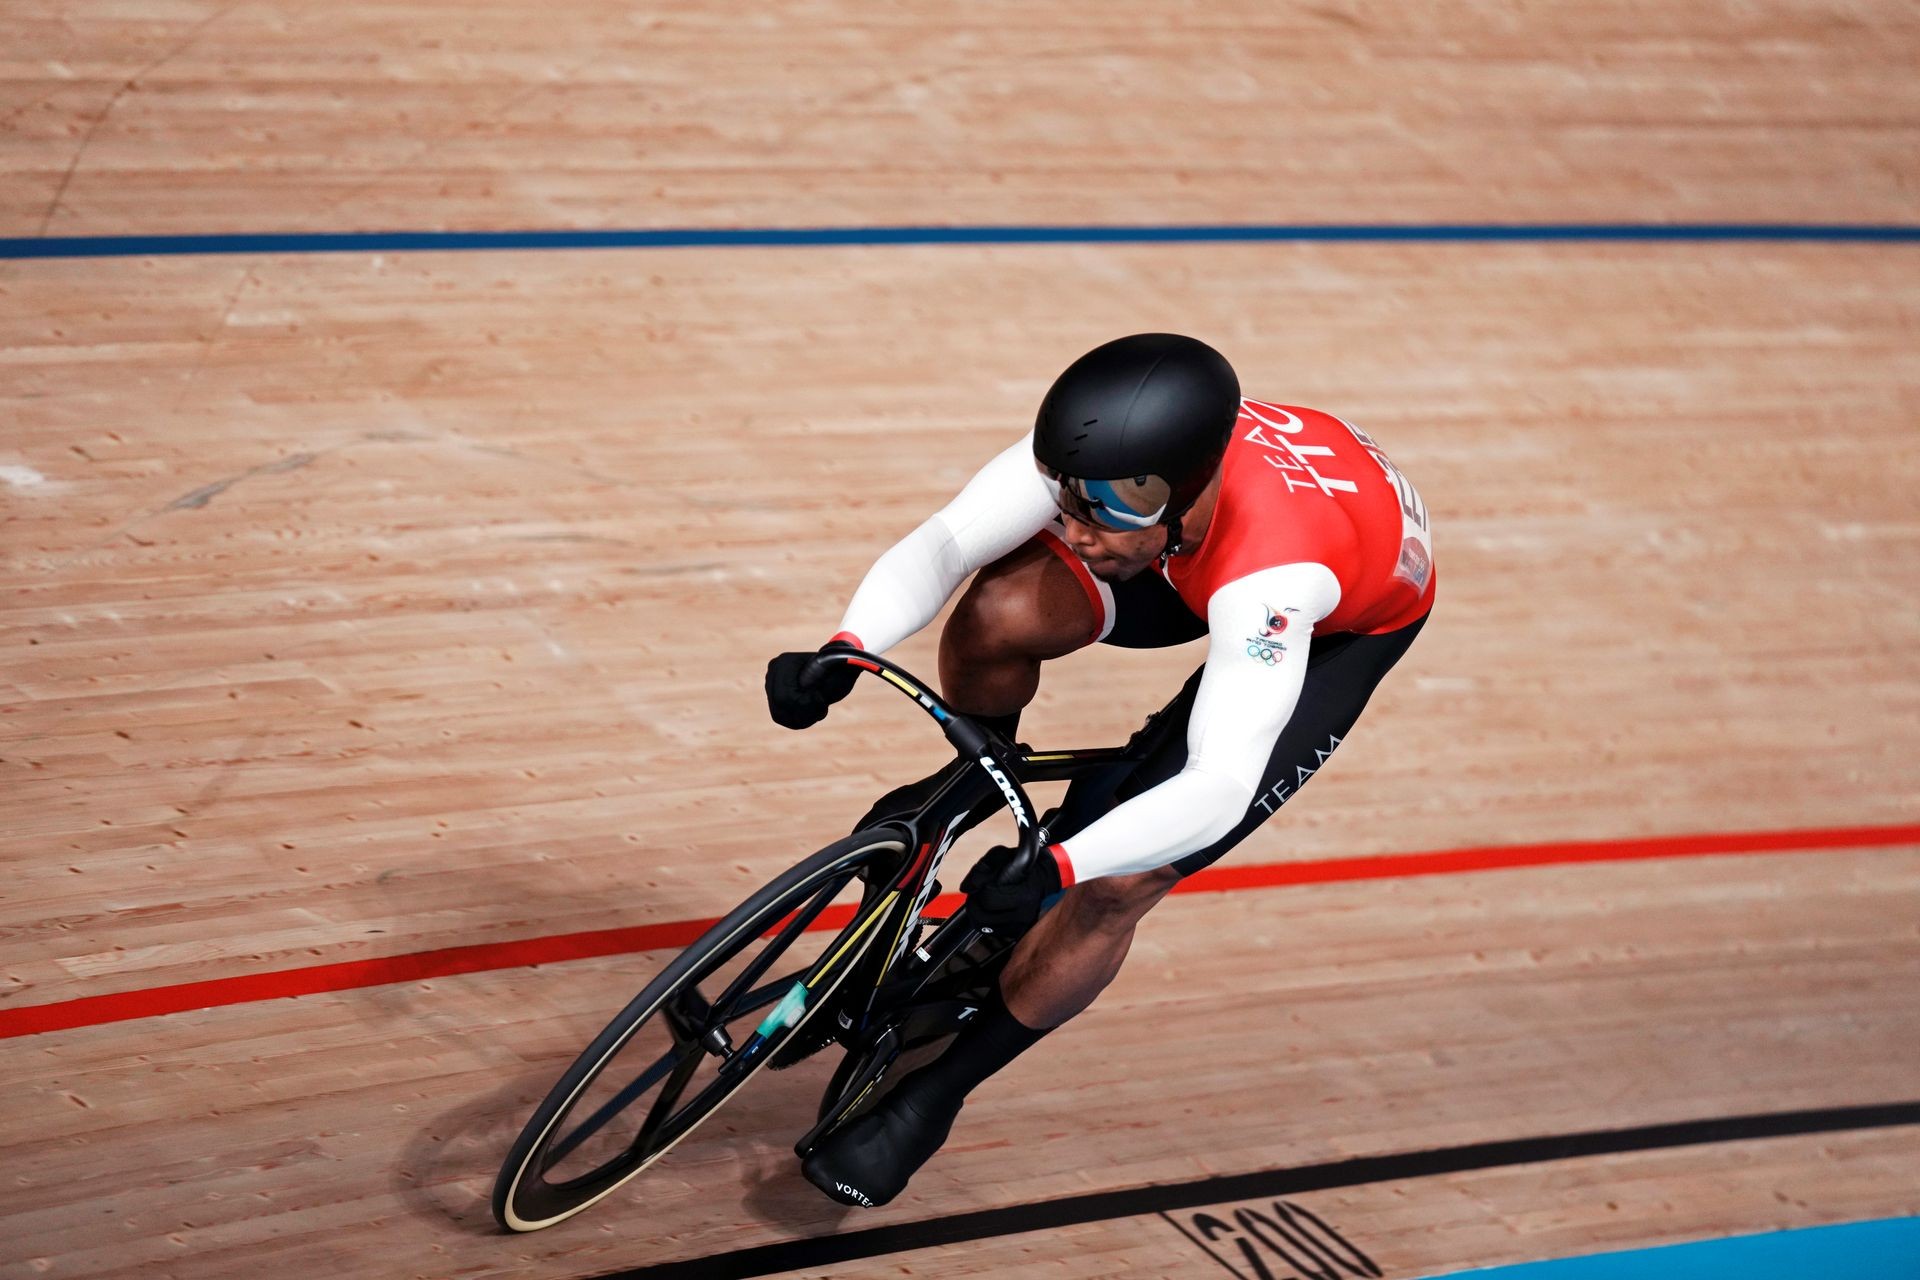 T&T's Nicholas Paul competes during the track cycling men's sprint race at the 2020 Summer Olympics on August 5 in Izu, Japan. (AP Photo/Thibault Camus)